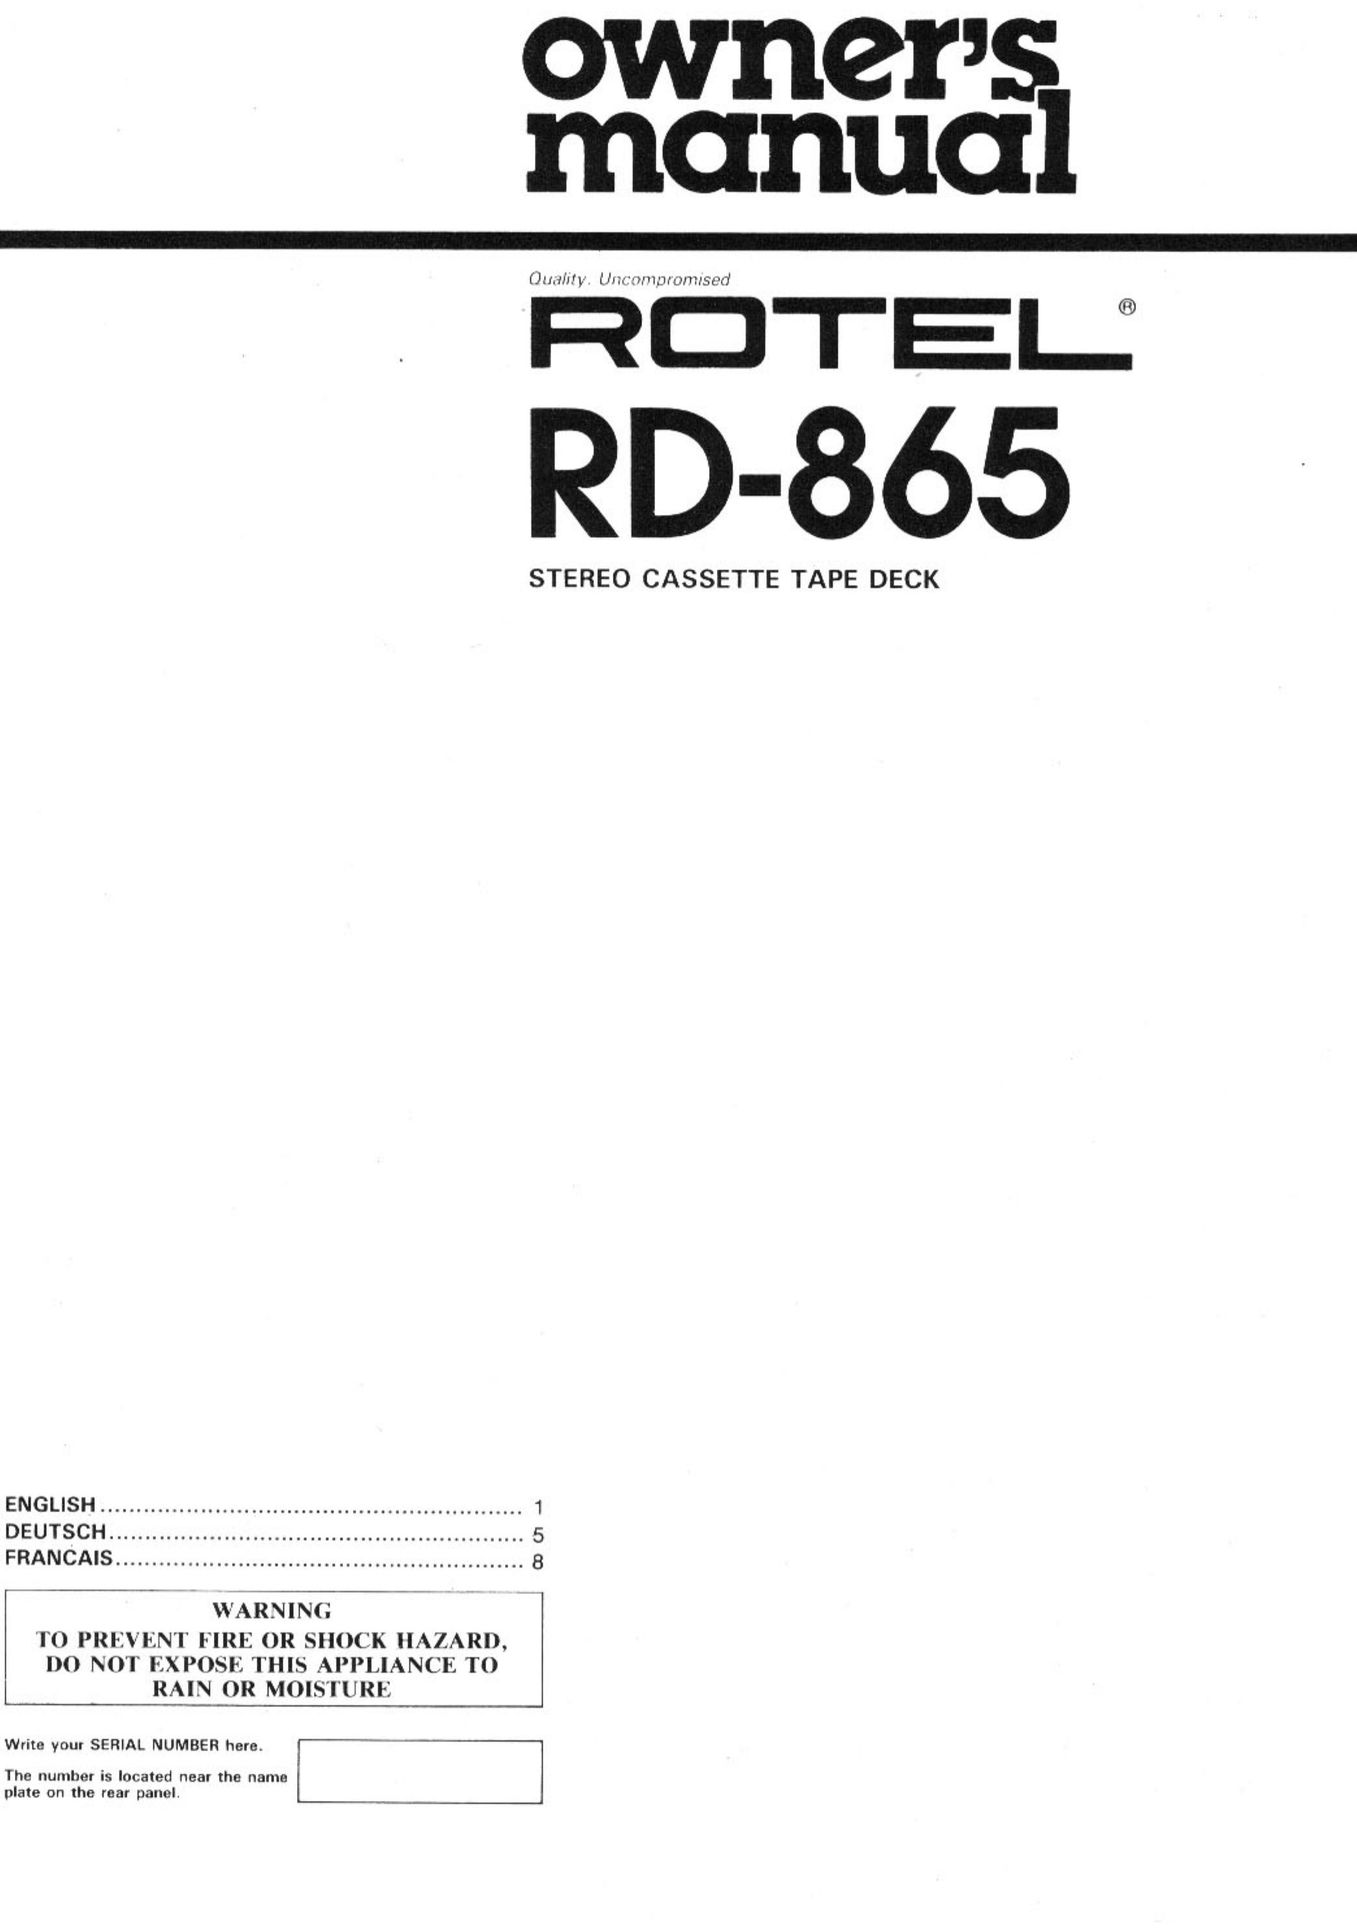 Rotel RD-865 Cassette Player User Manual